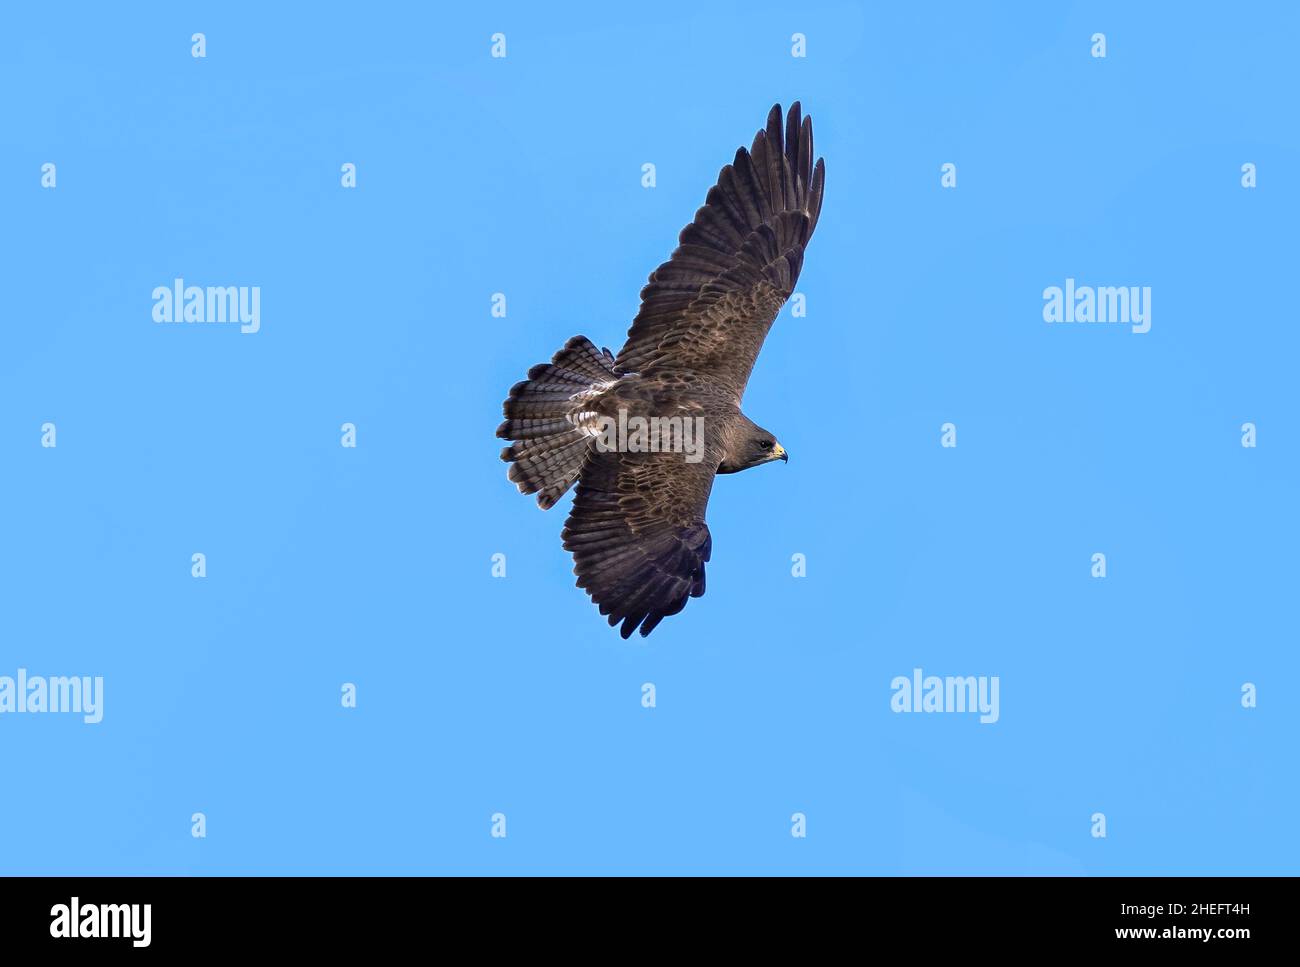 Closeup of an adult Swainson's Hawk of the Light Morph variety, gliding in the air with outstretched wings and fanned tail feathers against a blue sky. Stock Photo